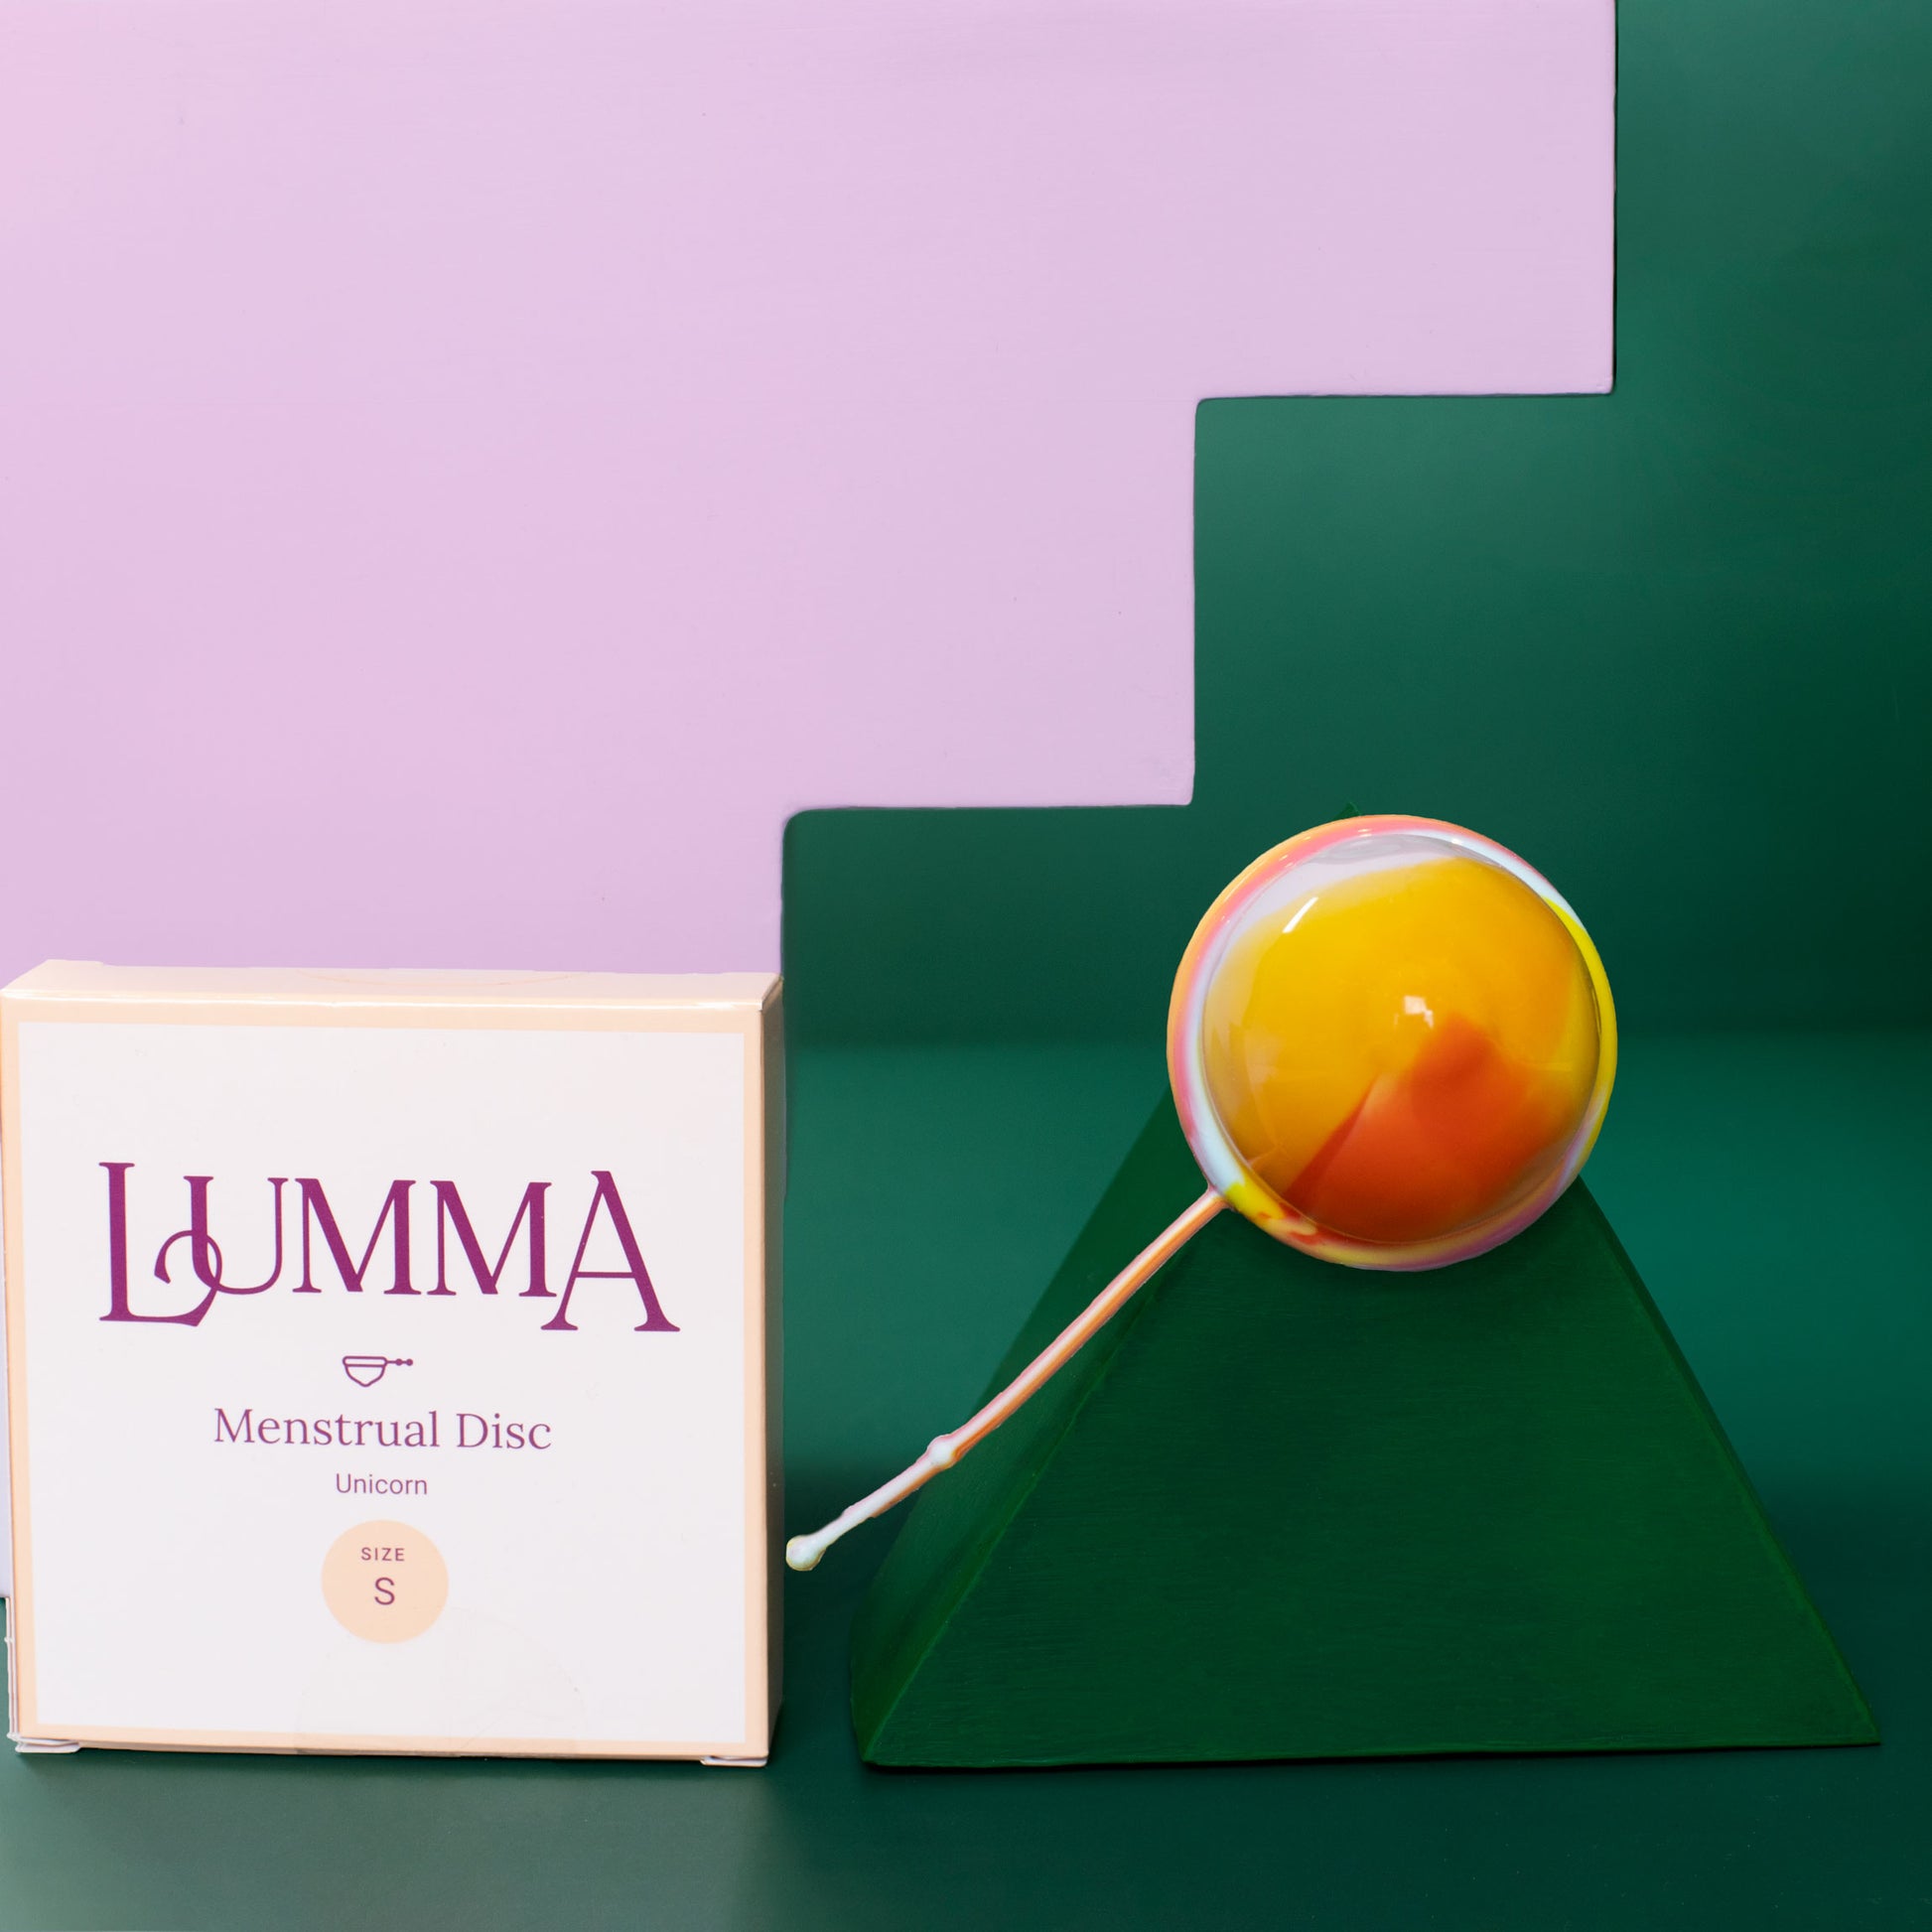 Lumma menstrual disc size Small Short in unicorn with packaging